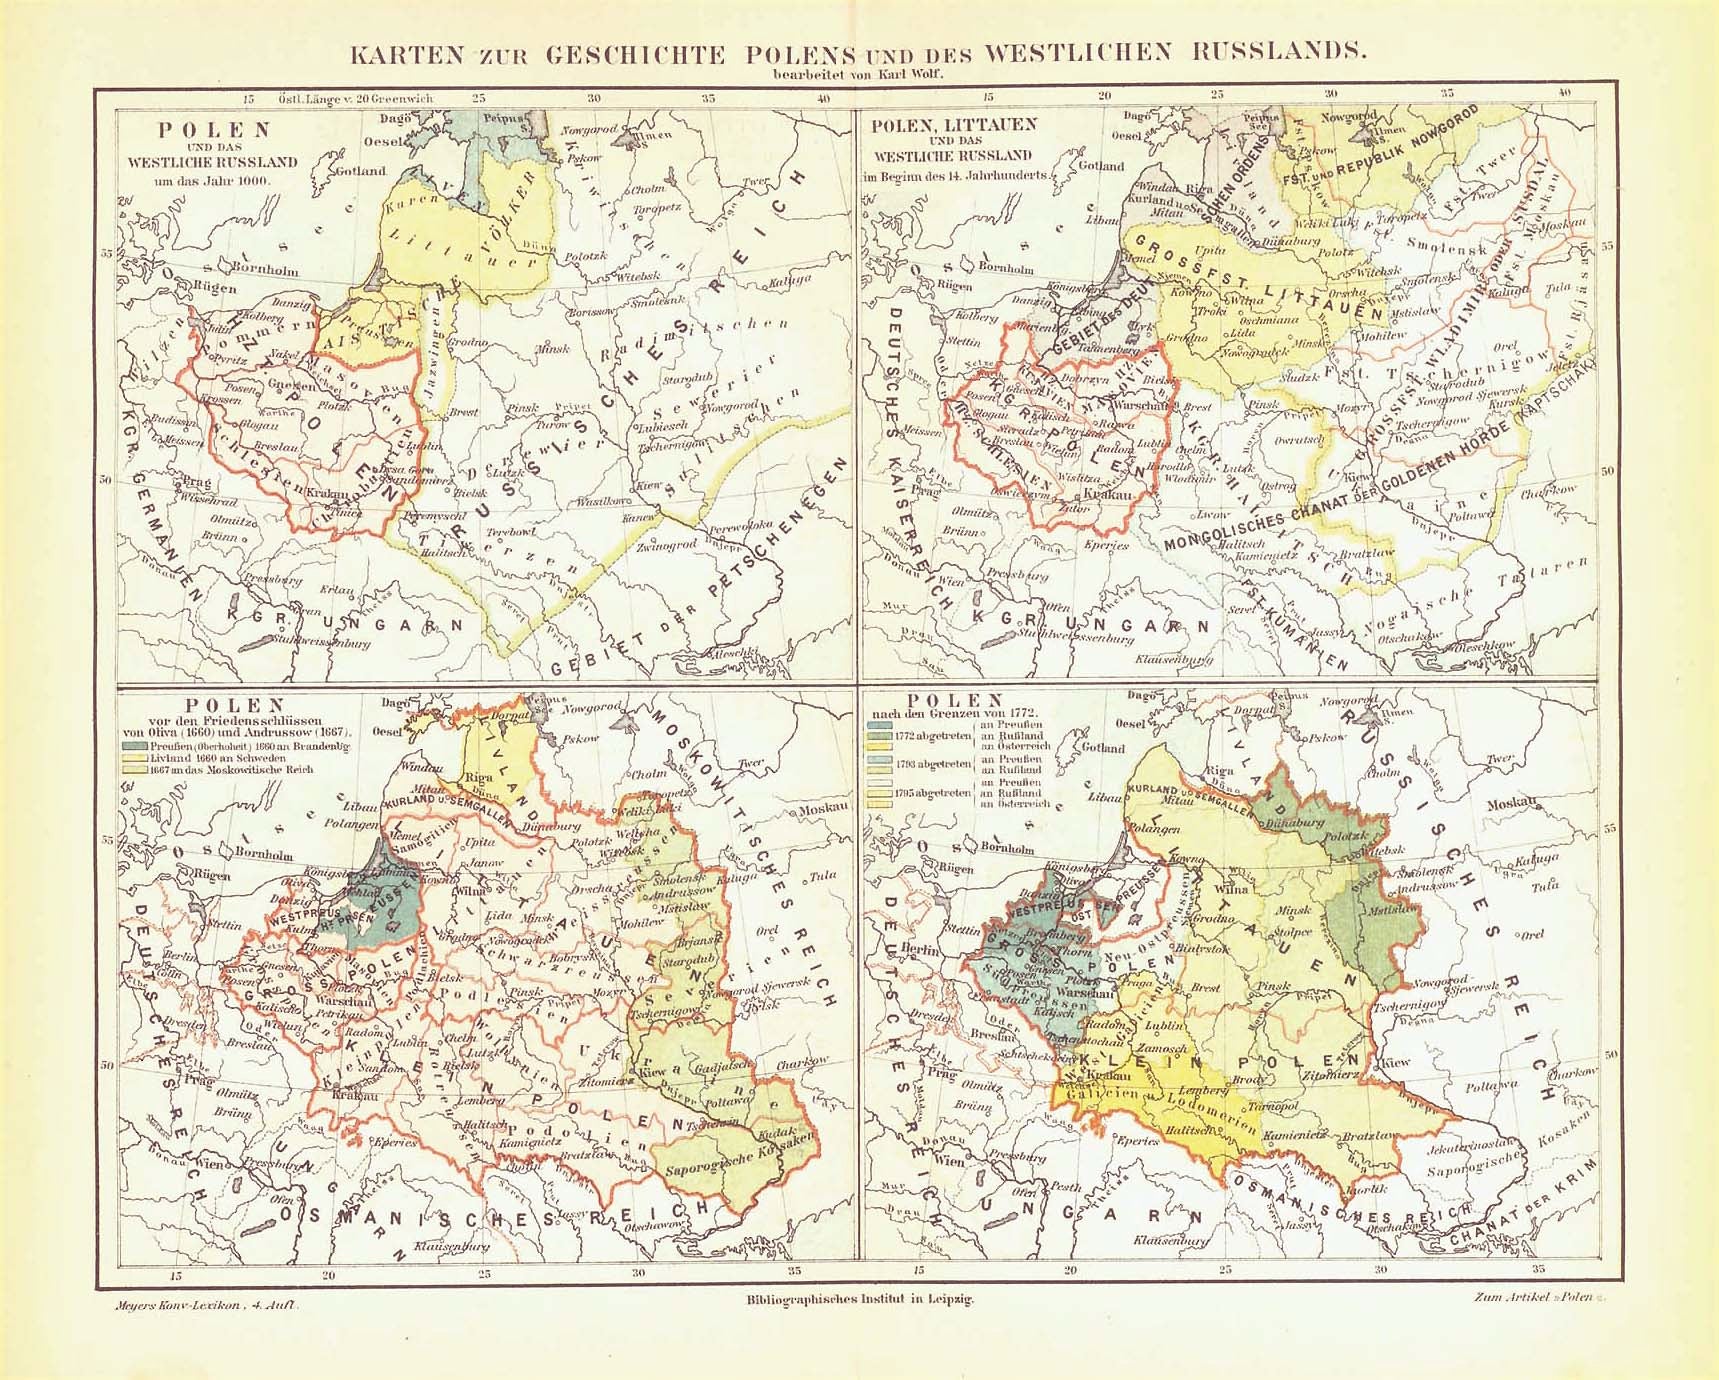 Poland, West Russia, Poland. - "Karten zur Geschichte Polens und des Westlichen Russlands"  4 small maps on one page: History of Poland and Western Russia in the years:  Ca. 1000, beginning of 14th century, &emdash; 1660 / 1667, 1772  Chromo-lithograph from zinc plate after the drawings by Karl Wolf  Published in Leipzig, 1893  Original antique print   For a 30% discount enter MAPS30 at chekout 